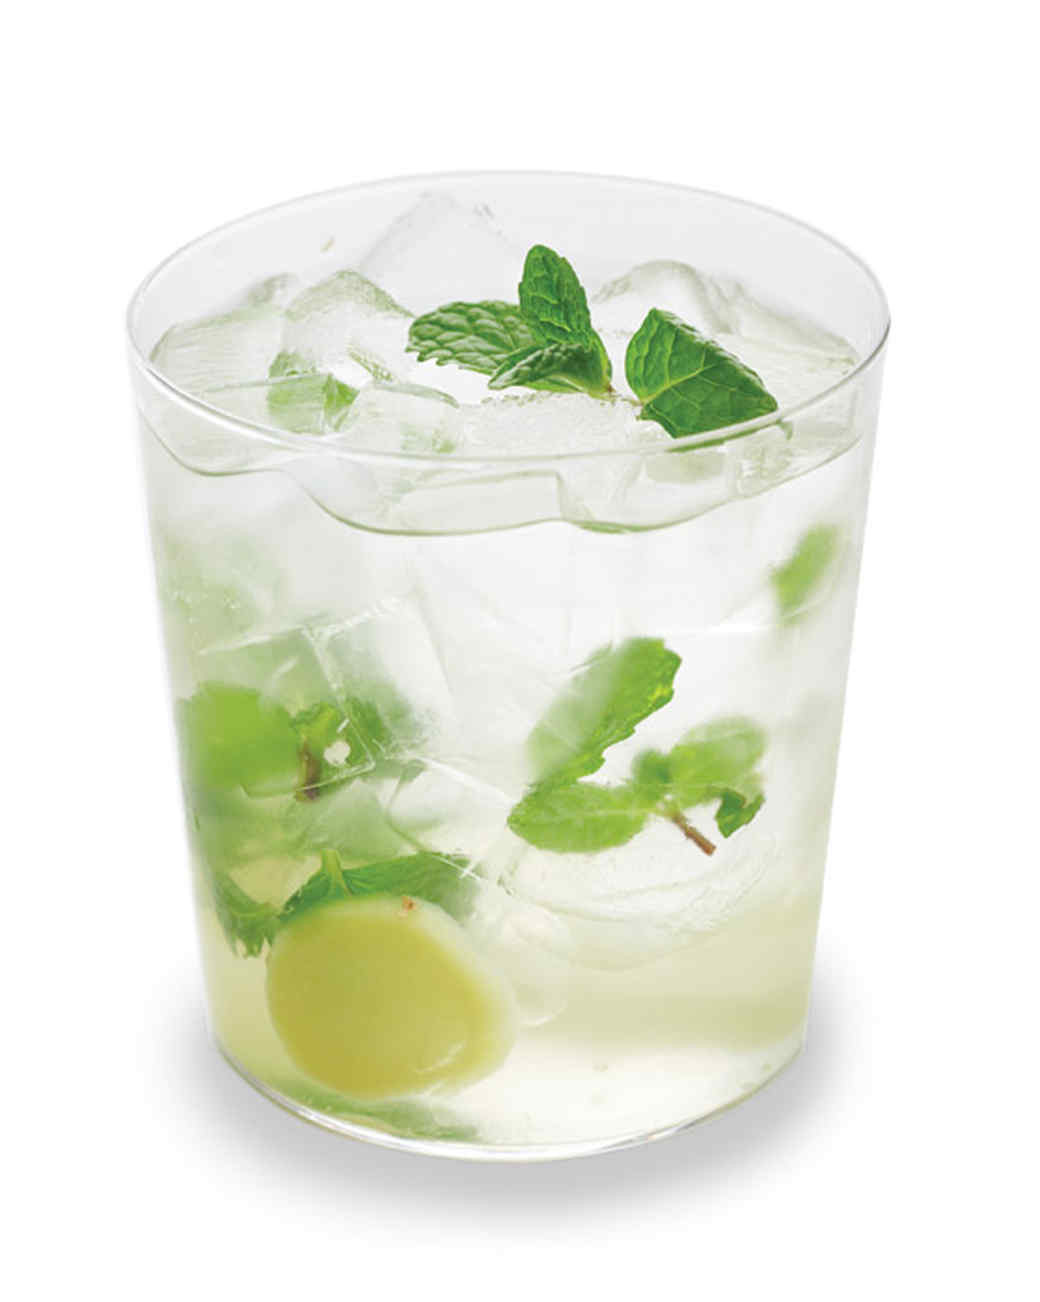 Drinks To Make With Vodka
 25 Vodka Cocktails You ll Want to Make Again and Again